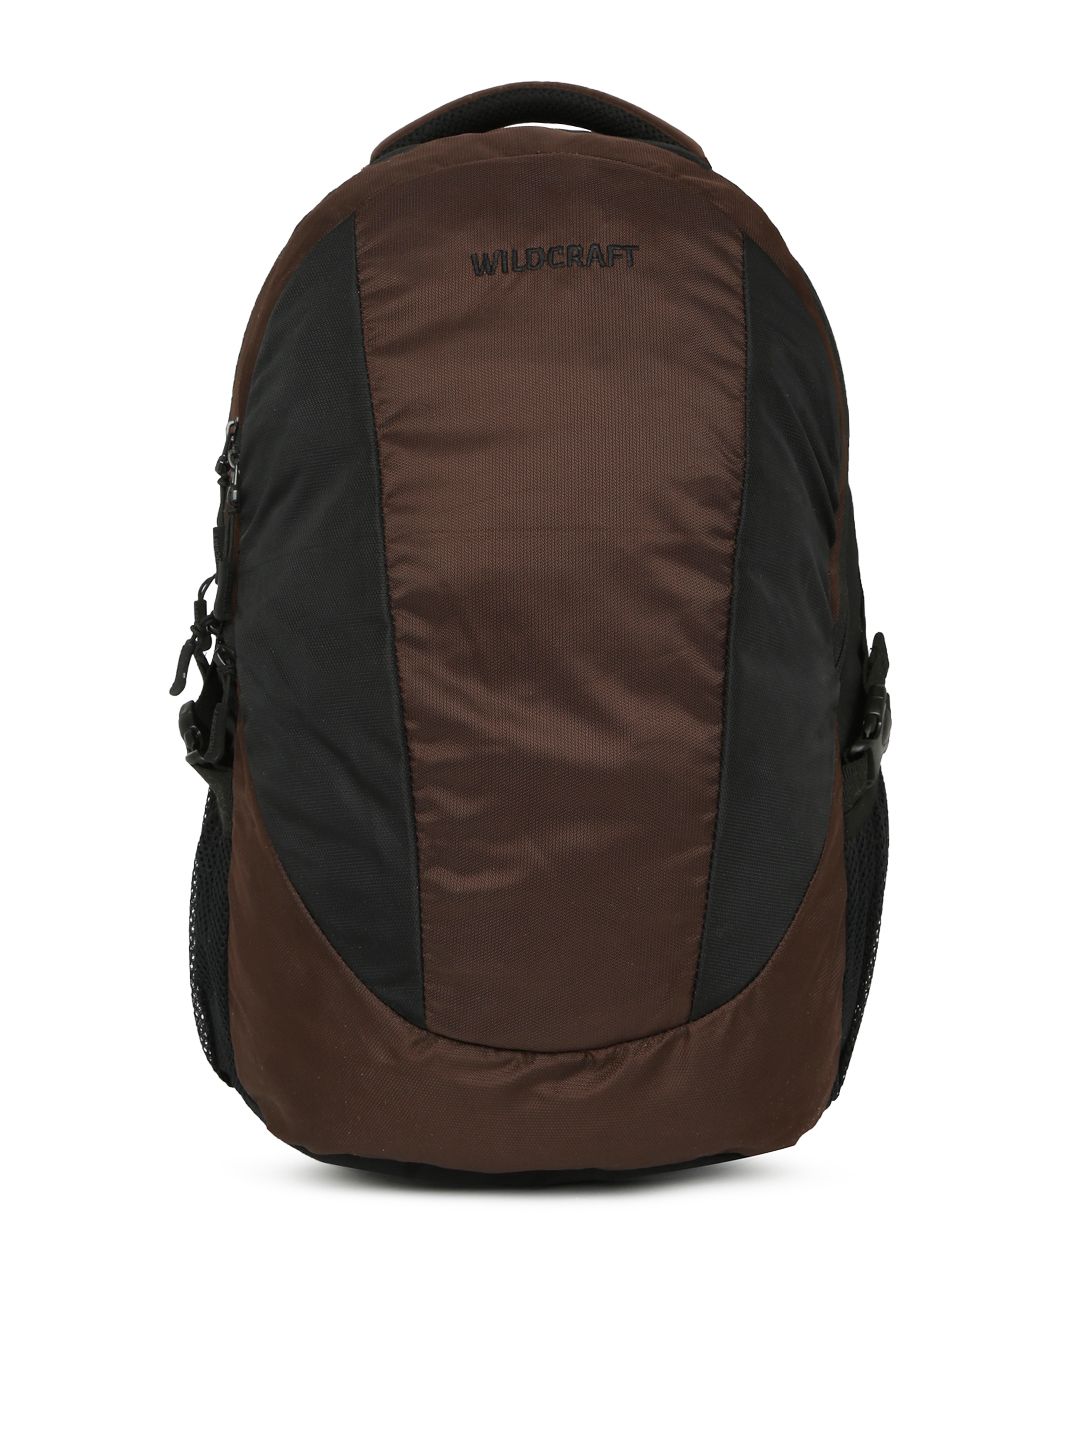 Wildcraft Unisex Brown Colourblocked Backpack Price in India